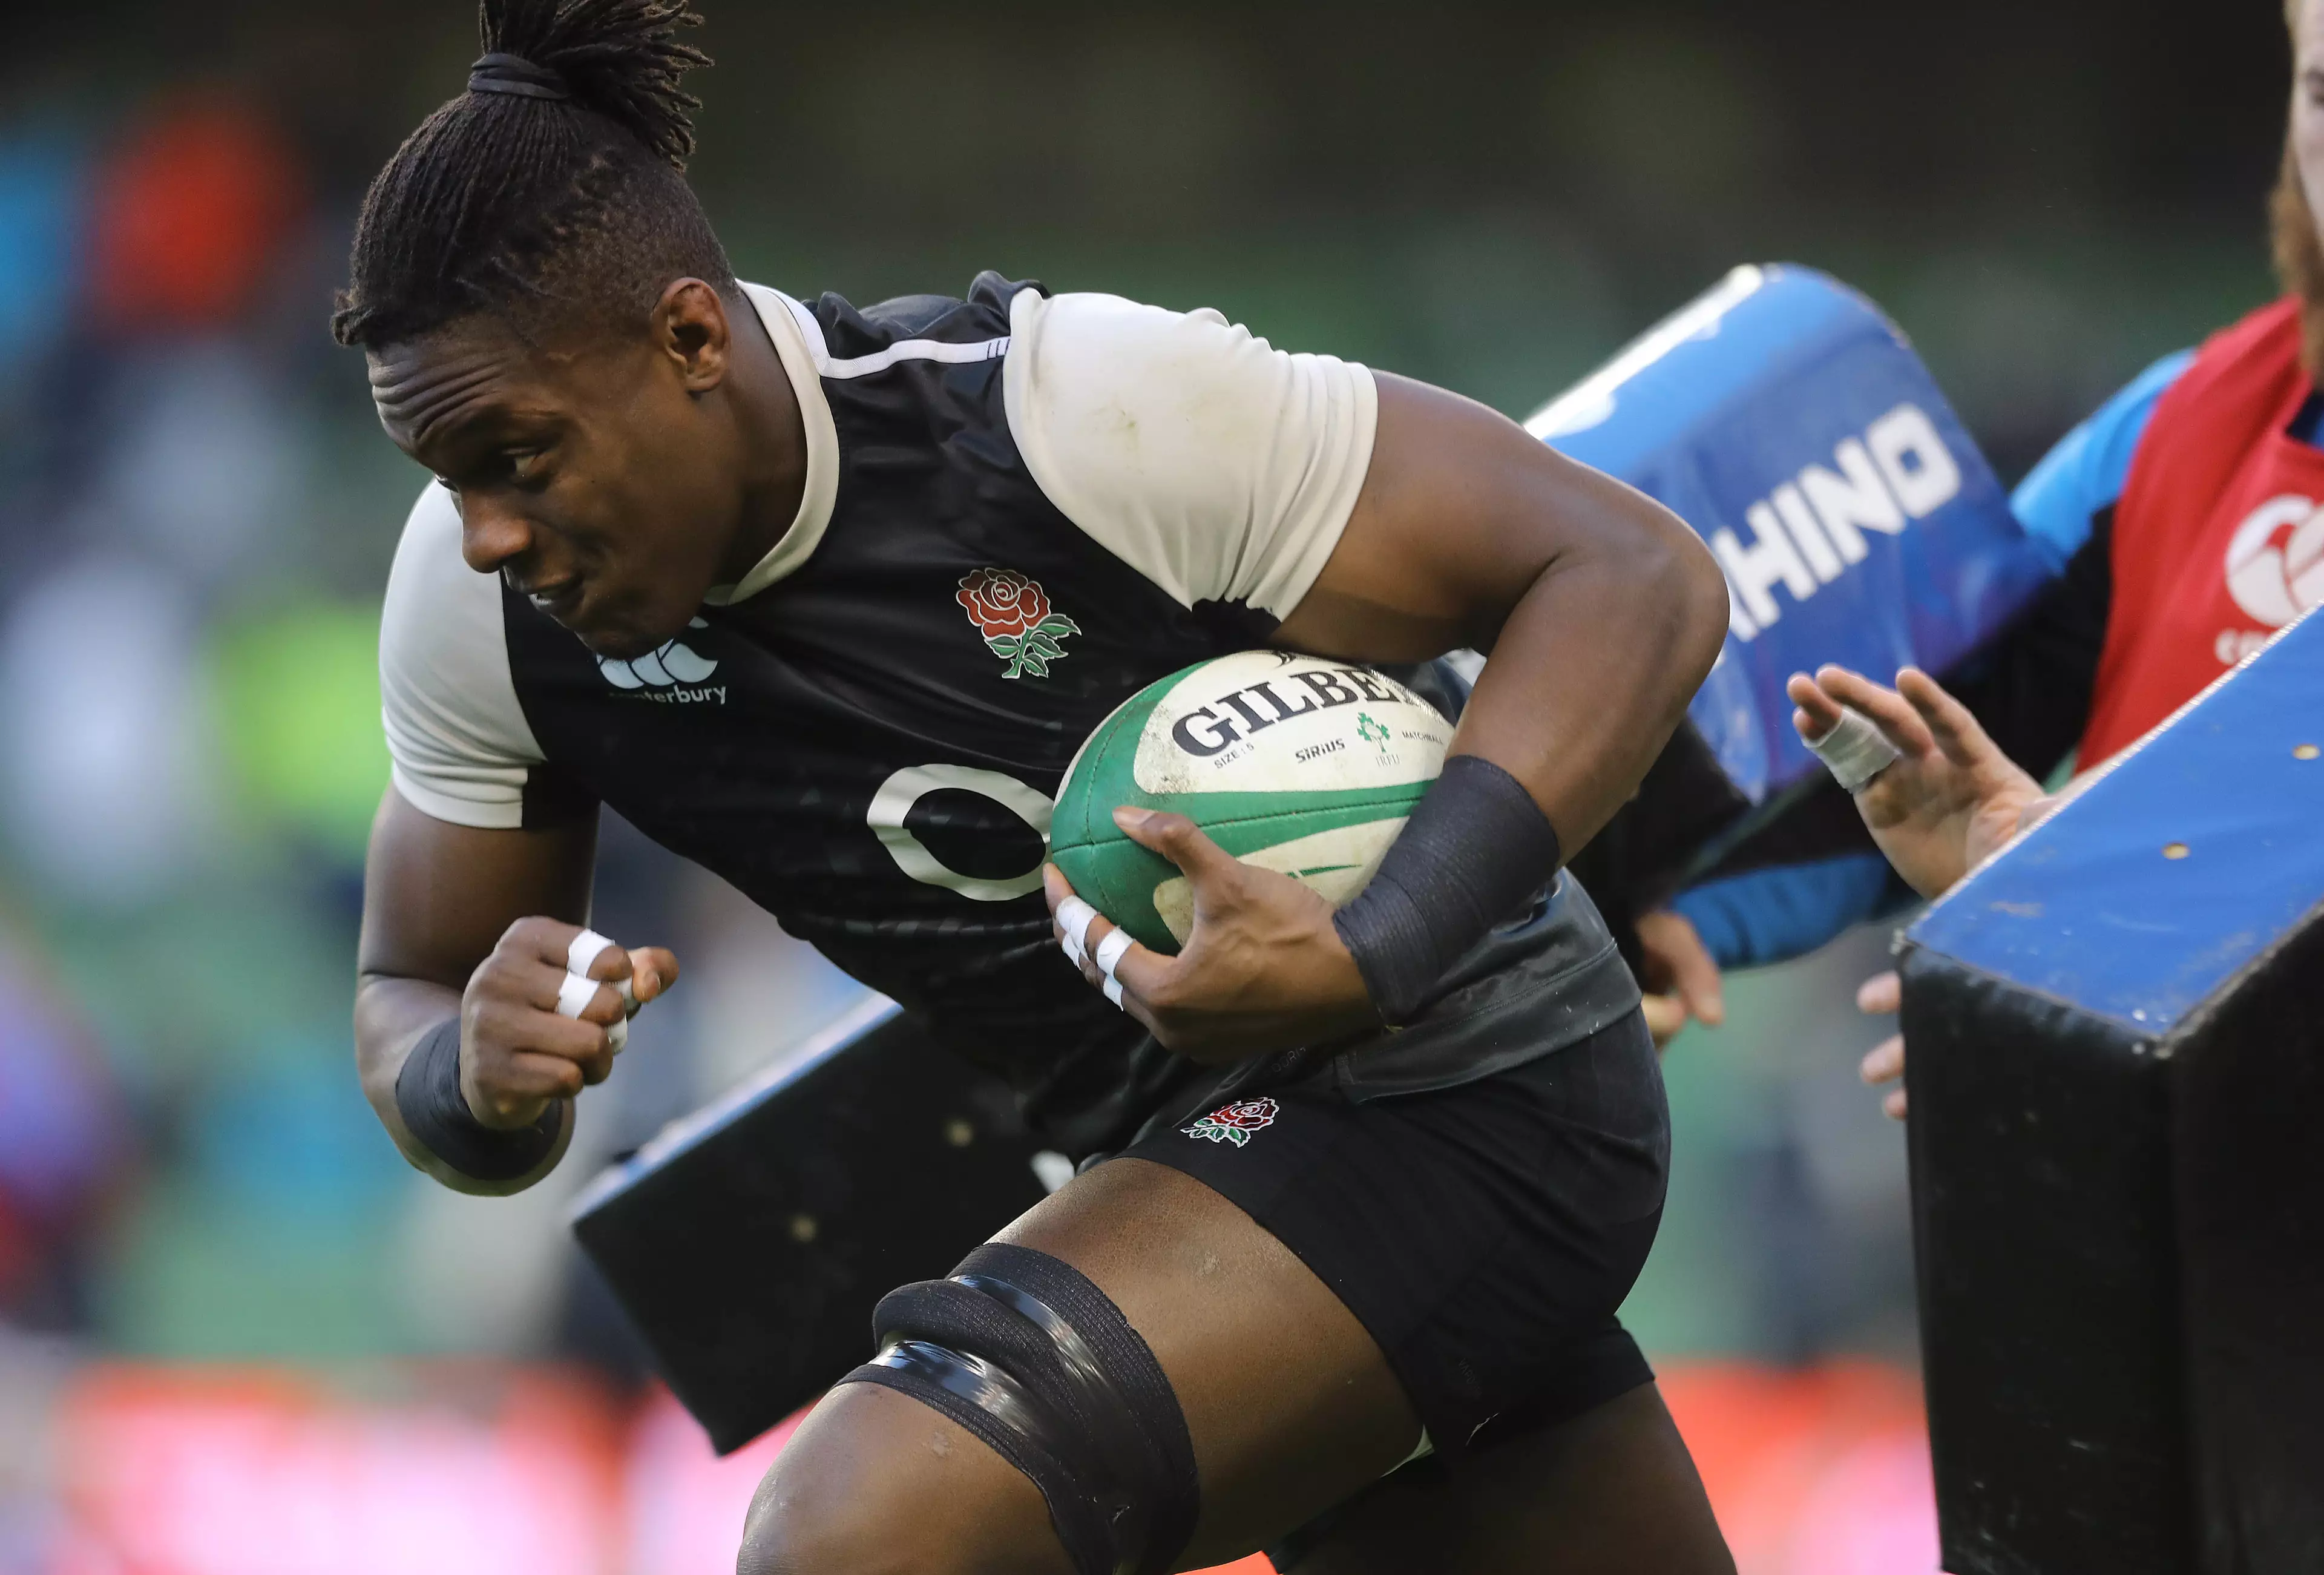 Maro Itoje will spearhead England's Rugby World Cup bid in Japan